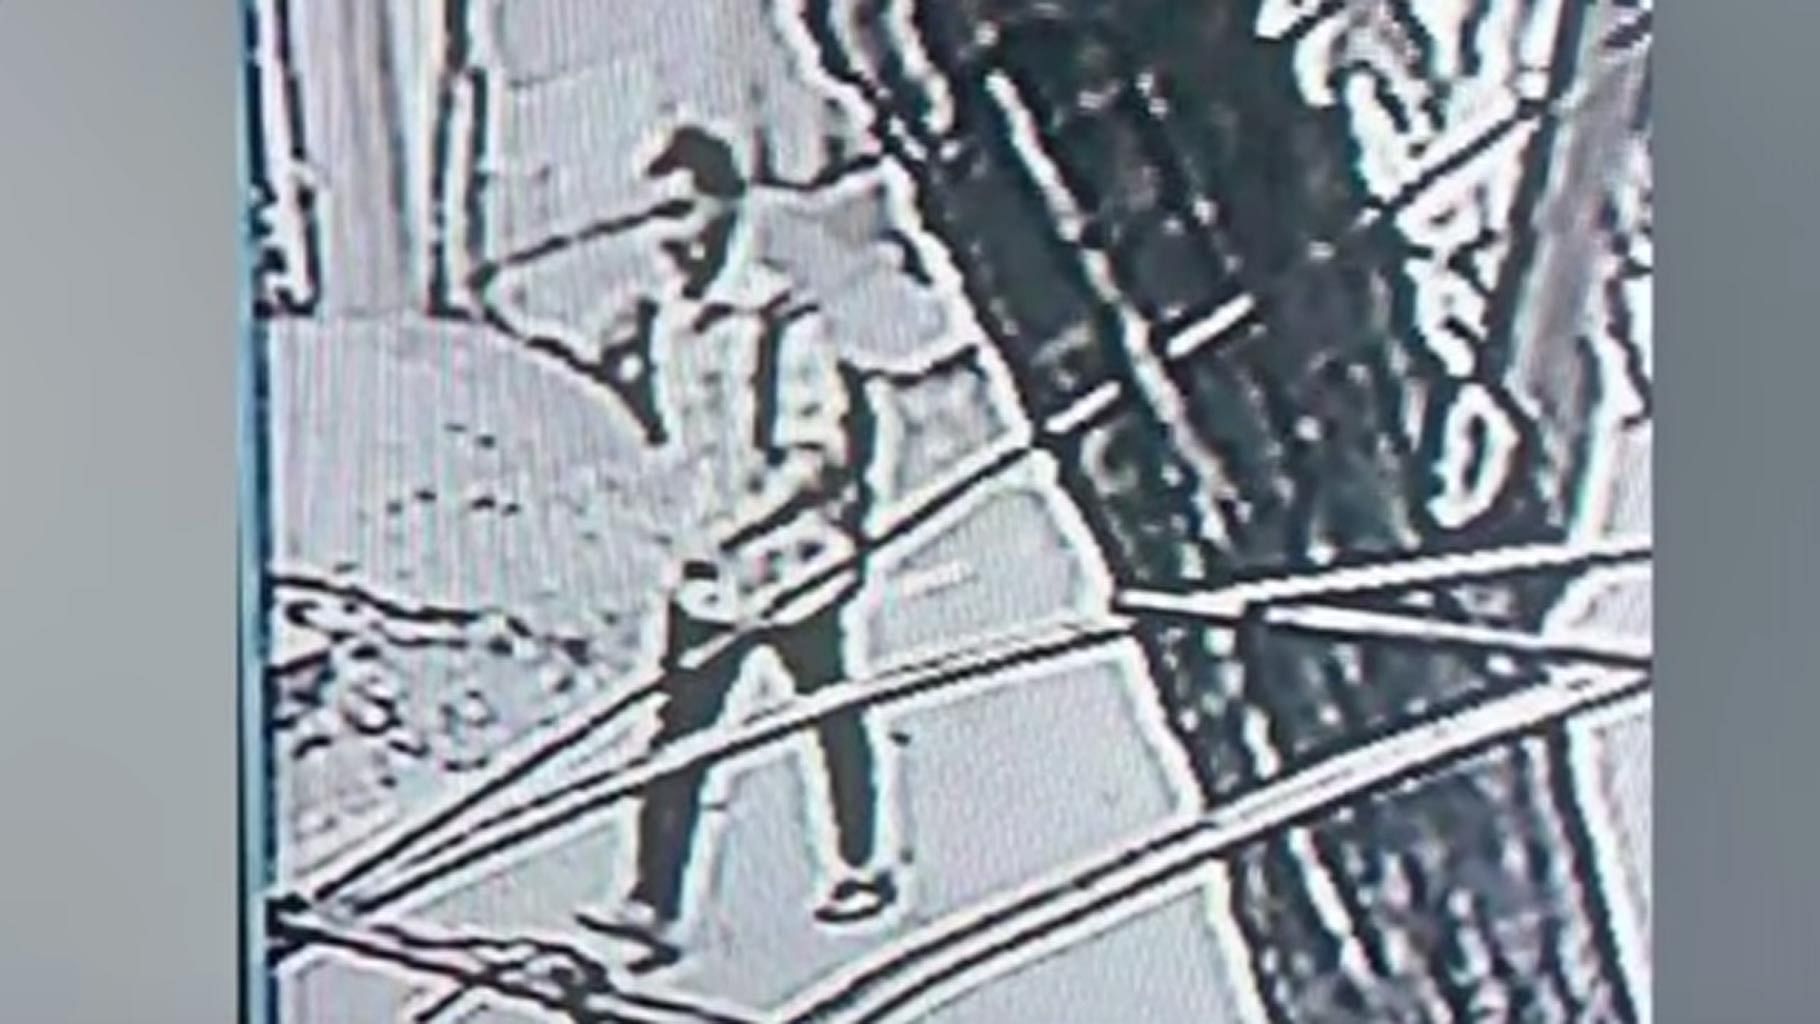 A picture of the suspect walking at the station has been released by Chennai police. (Photo: ANI)